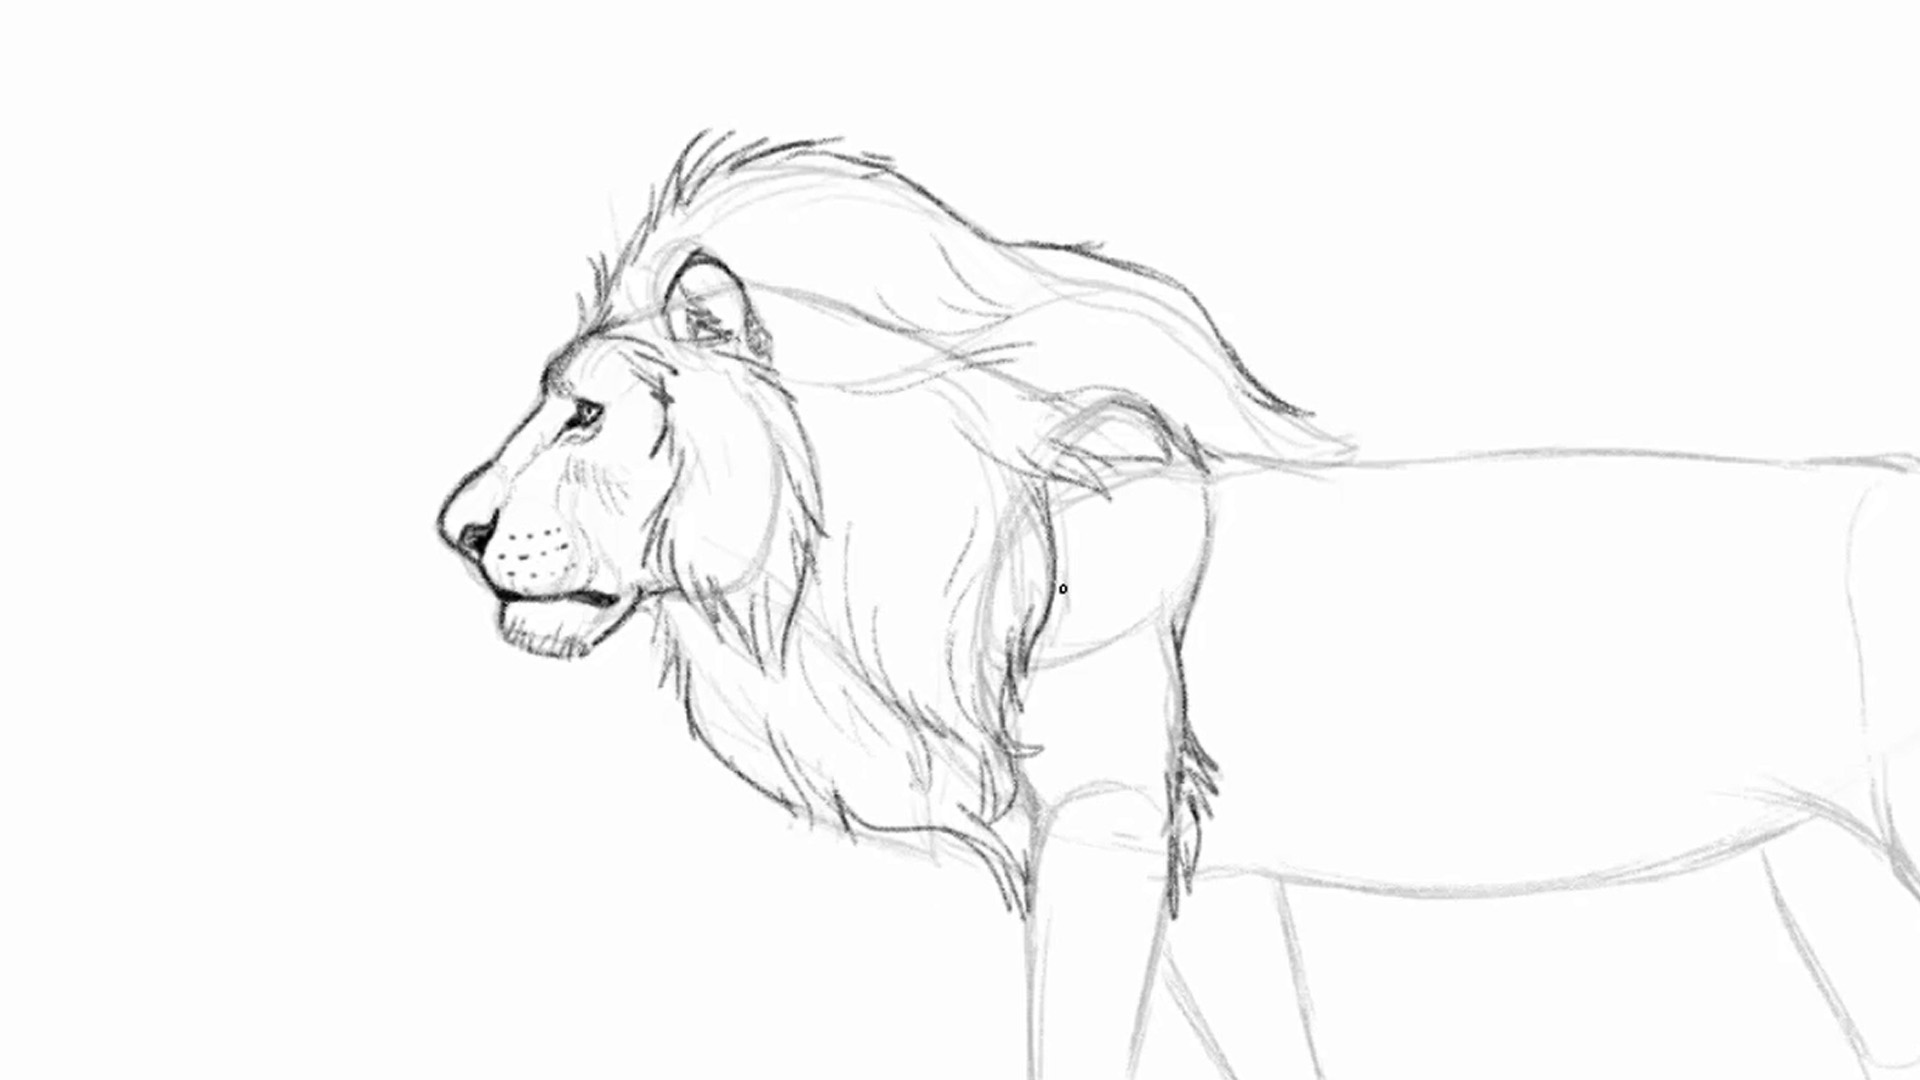 sketch of lion with detail in face